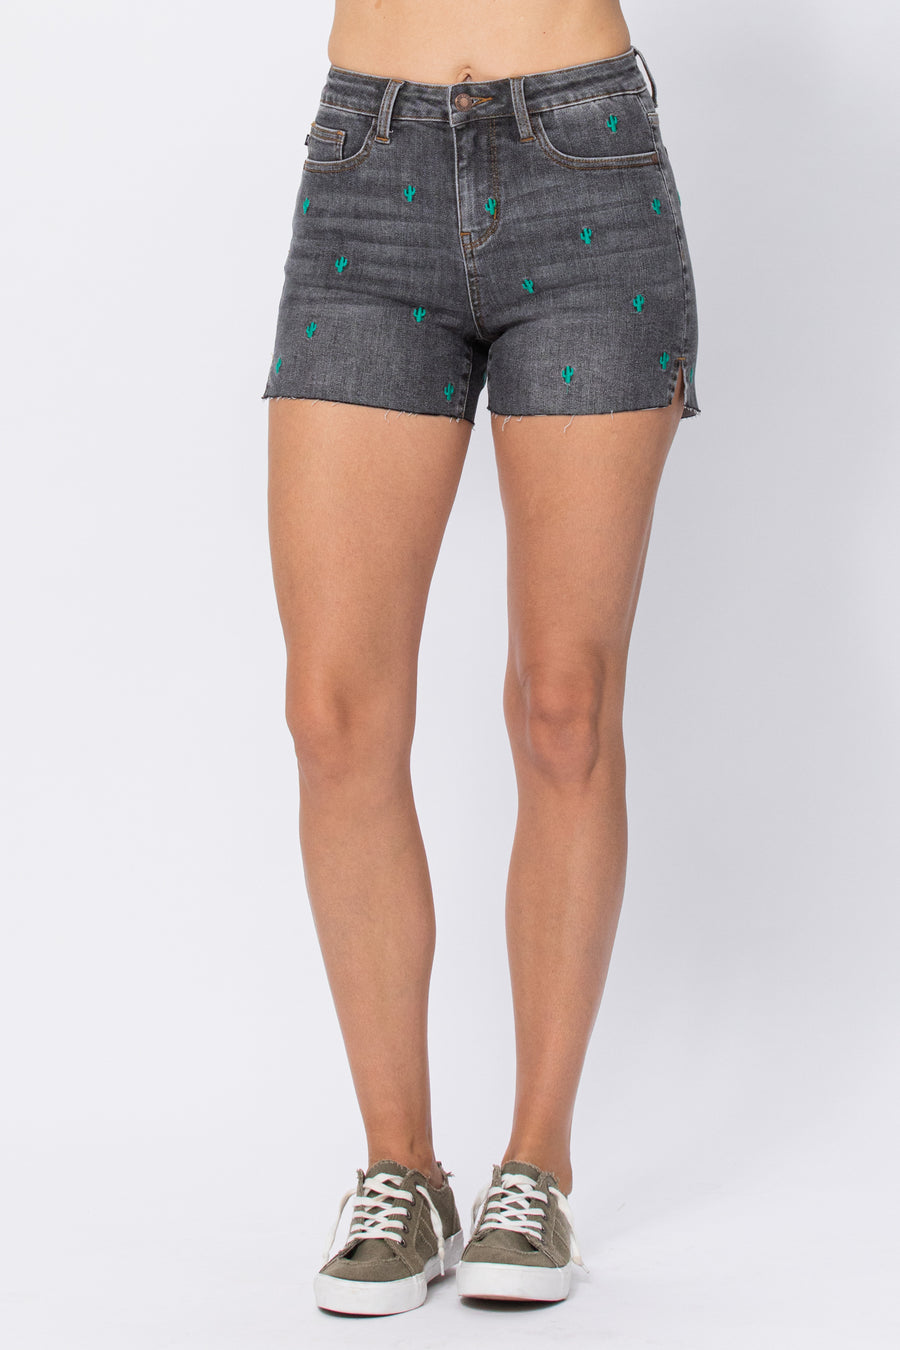 Lucille Cactus Embroidery Shorts - PLUS